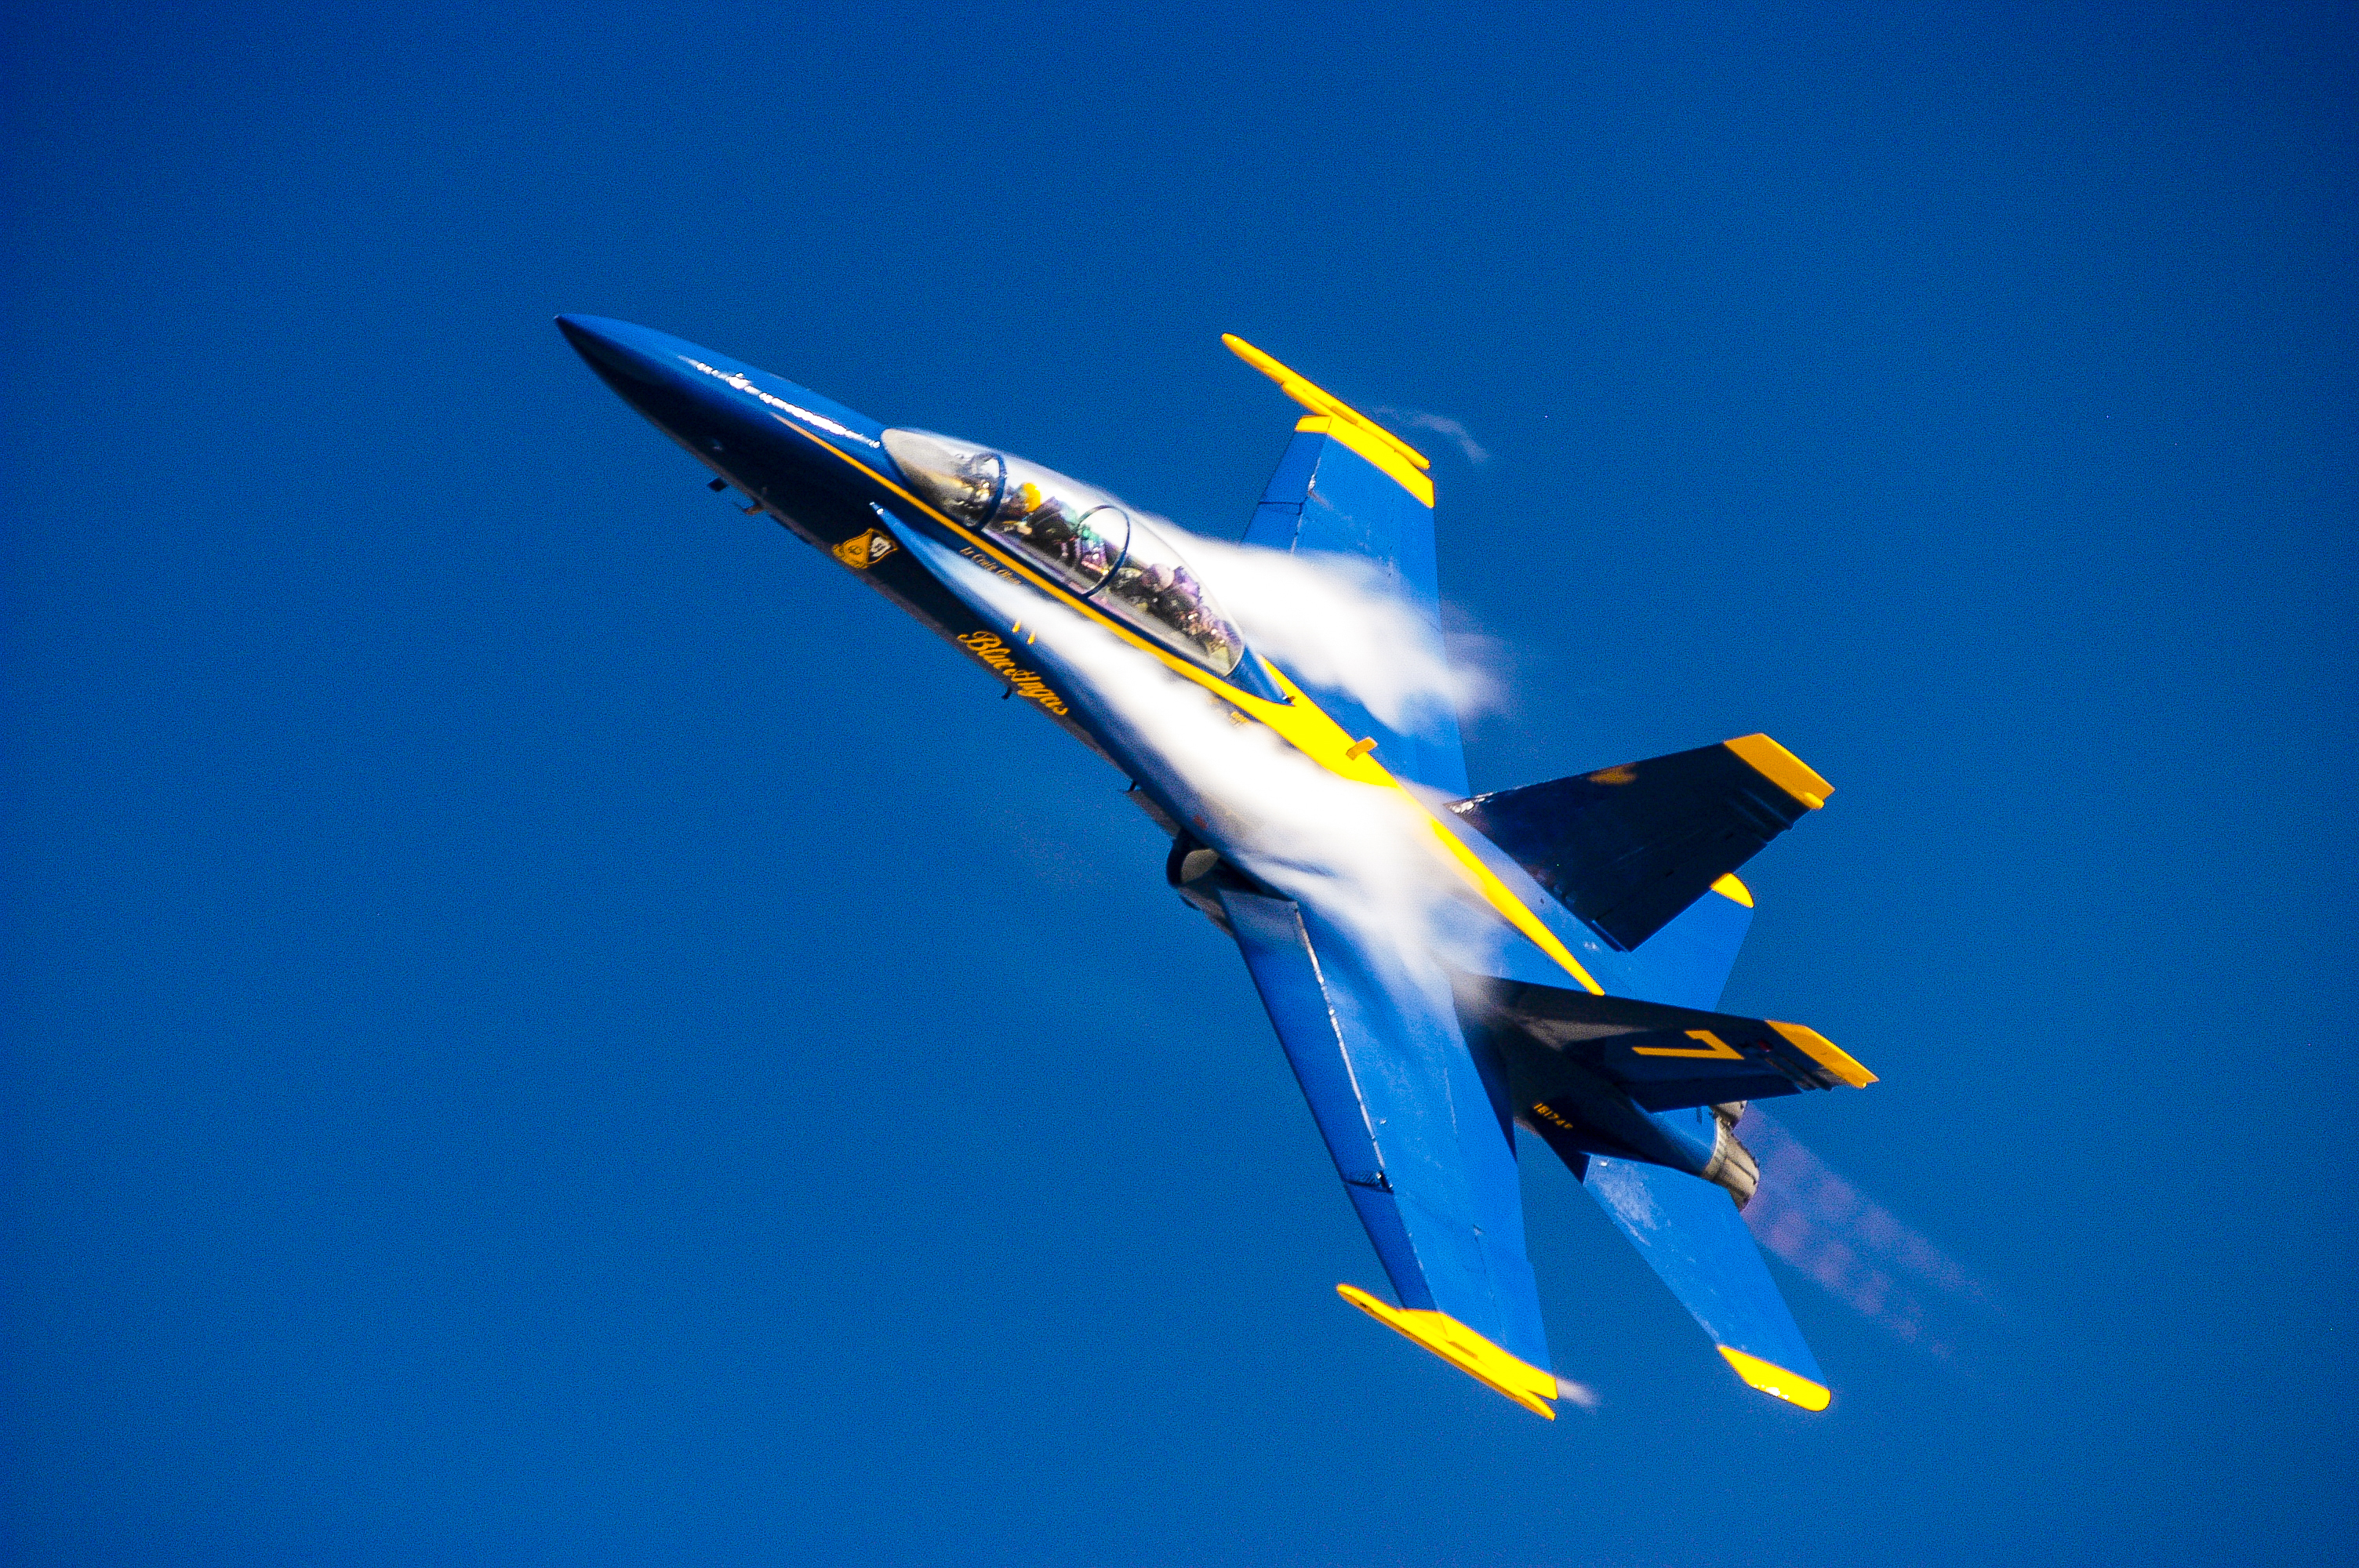 24 Tips on How to Photograph Air Shows | B&H Explora